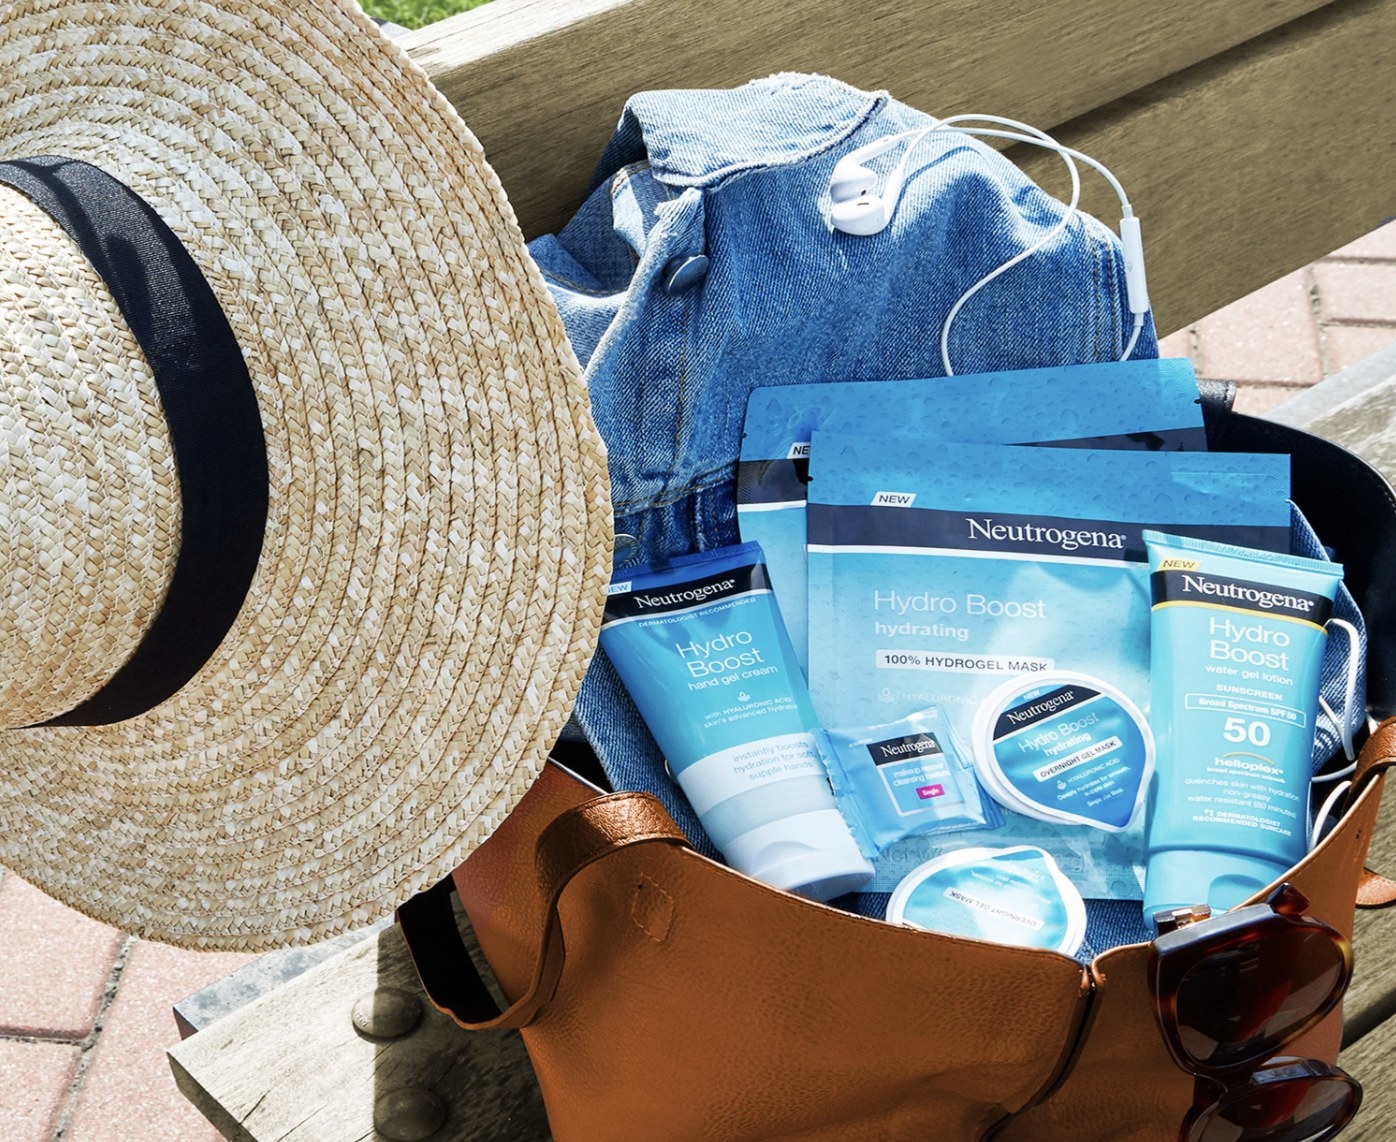 A beach hat and bag with face mask, sunscreen, and a jean jacket